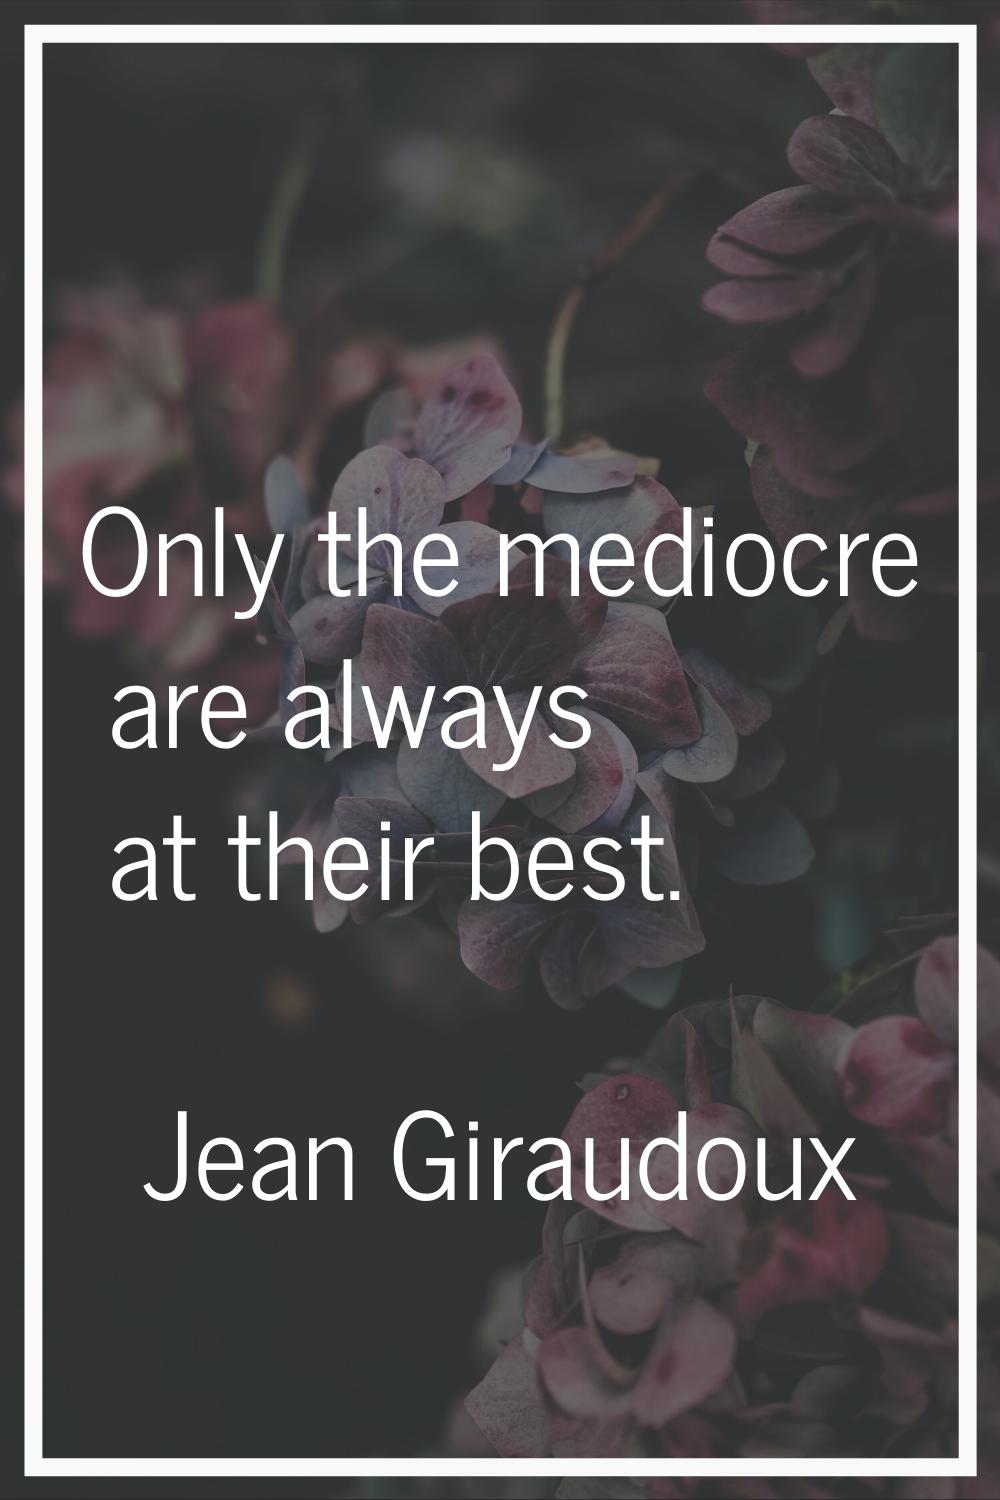 Only the mediocre are always at their best.